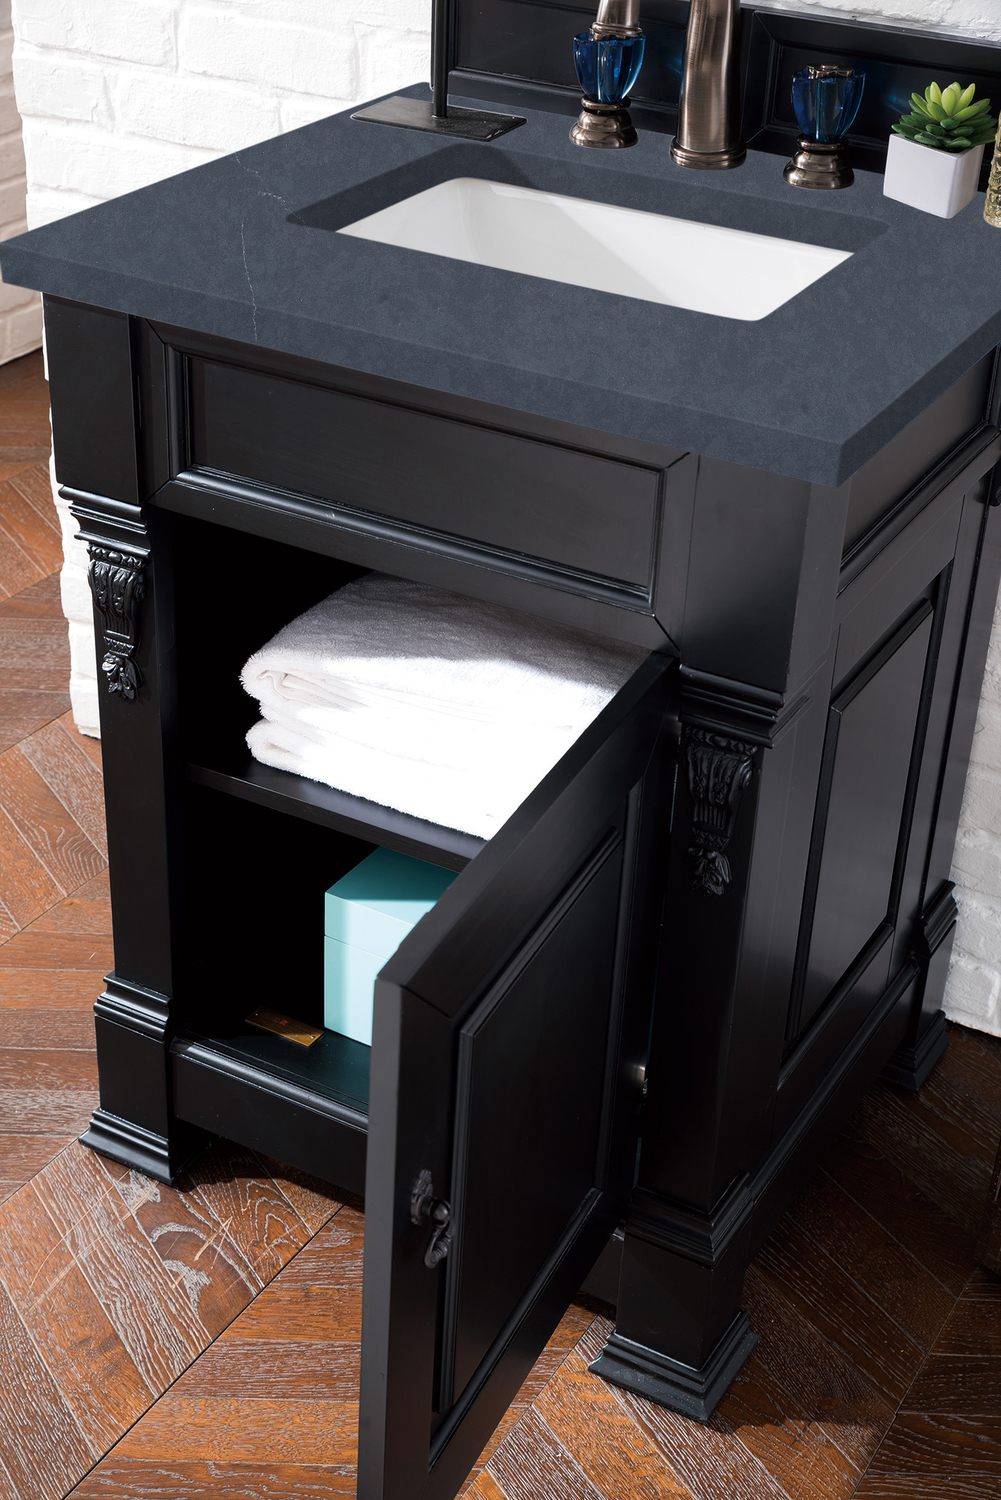 small double sink vanity James Martin Vanity Antique Black Transitional